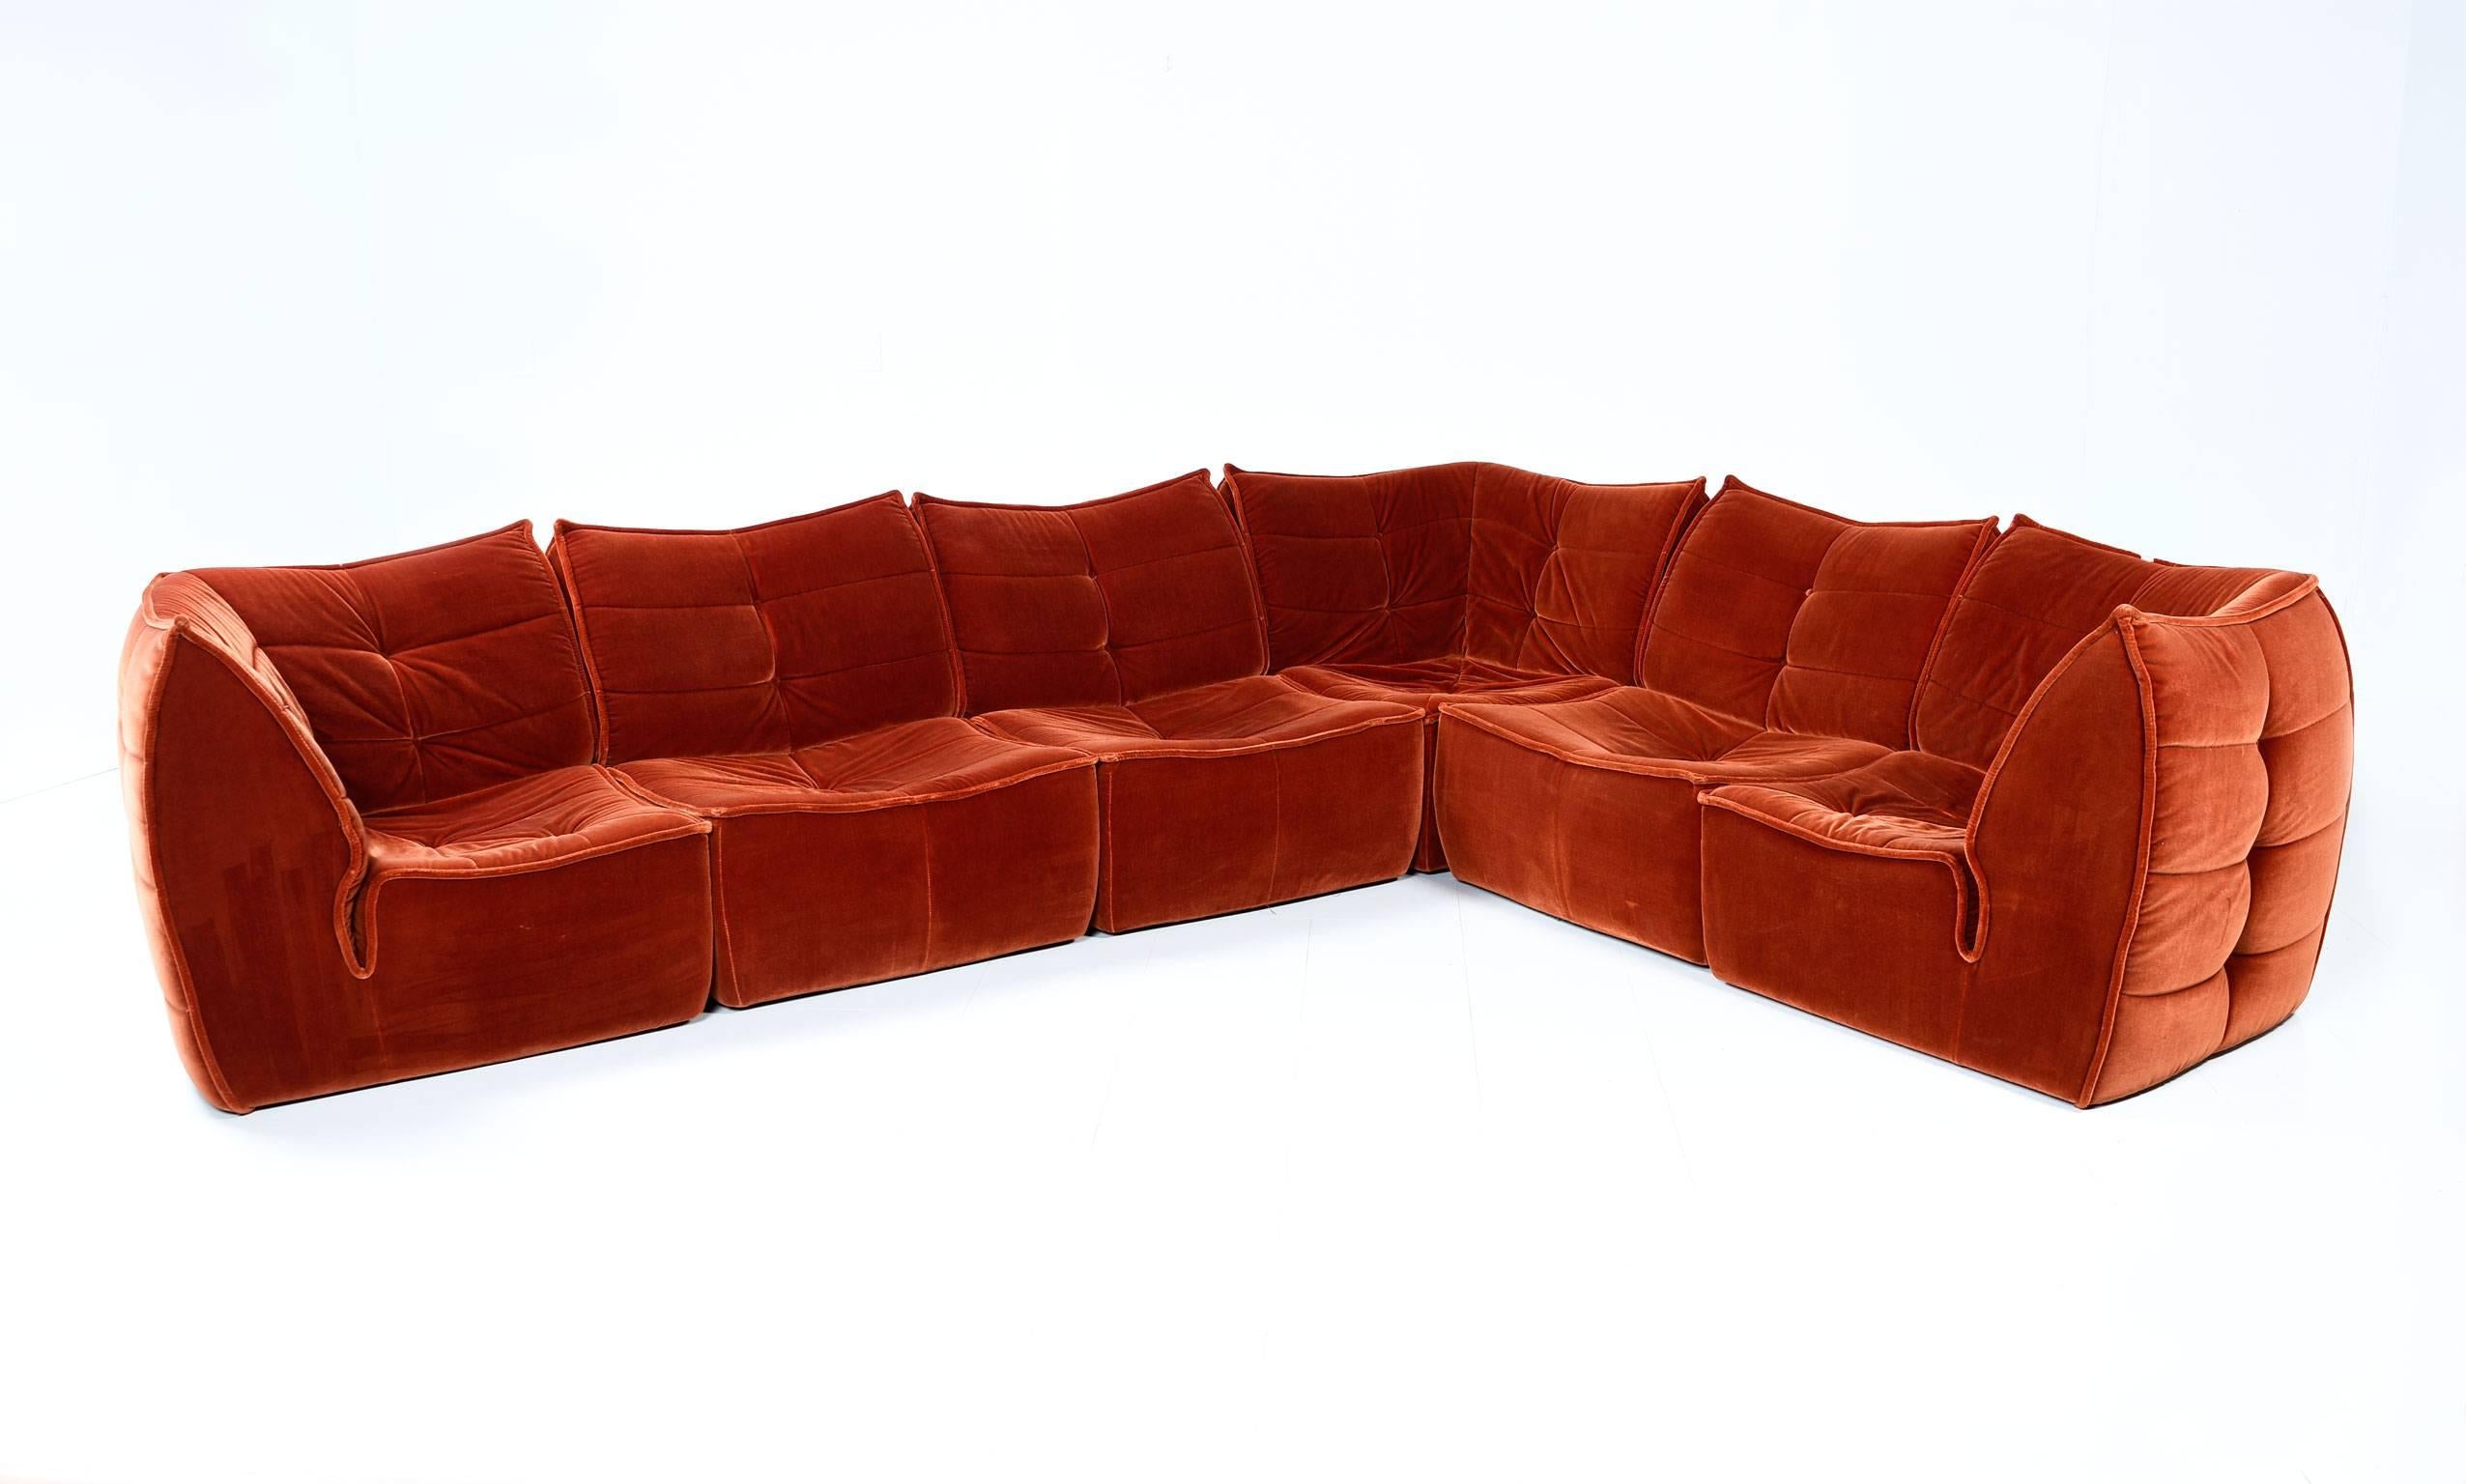 Luxurious and sexy 1970s modular conversation pit group sectional sofa consists of 6 pieces. Use all modules in the arrangement or break the pieces into smaller groups. The group consists of three corner pieces and three straight side modules. No